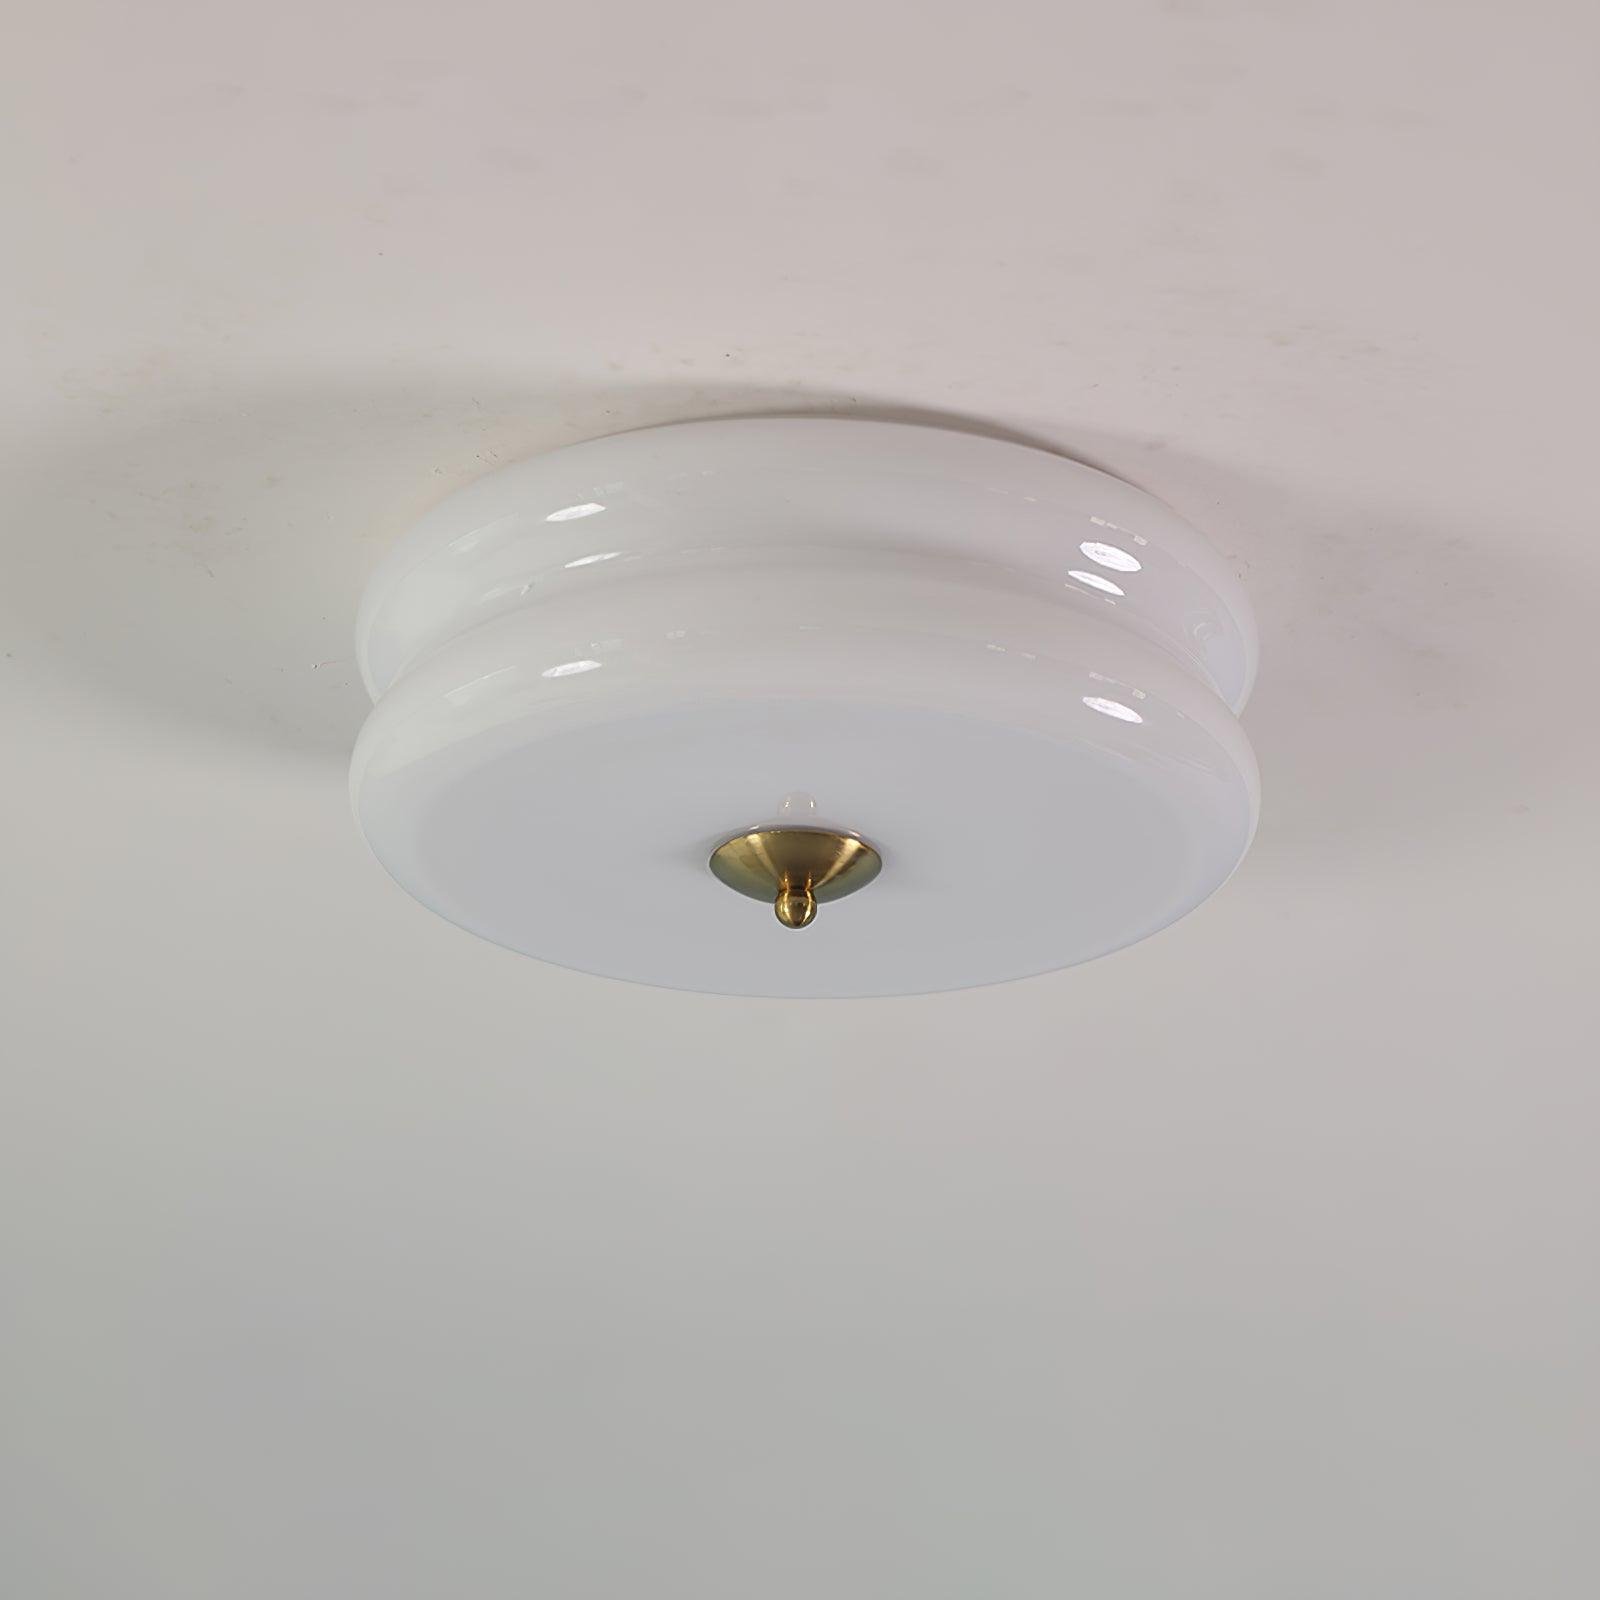 Art Deco Vintage Ceiling Light with a Diameter of 15.7 inches and a Height of 5.1 inches, also available in a Diameter of 40cm and Height of 13cm. The color options include Gold and White, emitting a Cool Light.